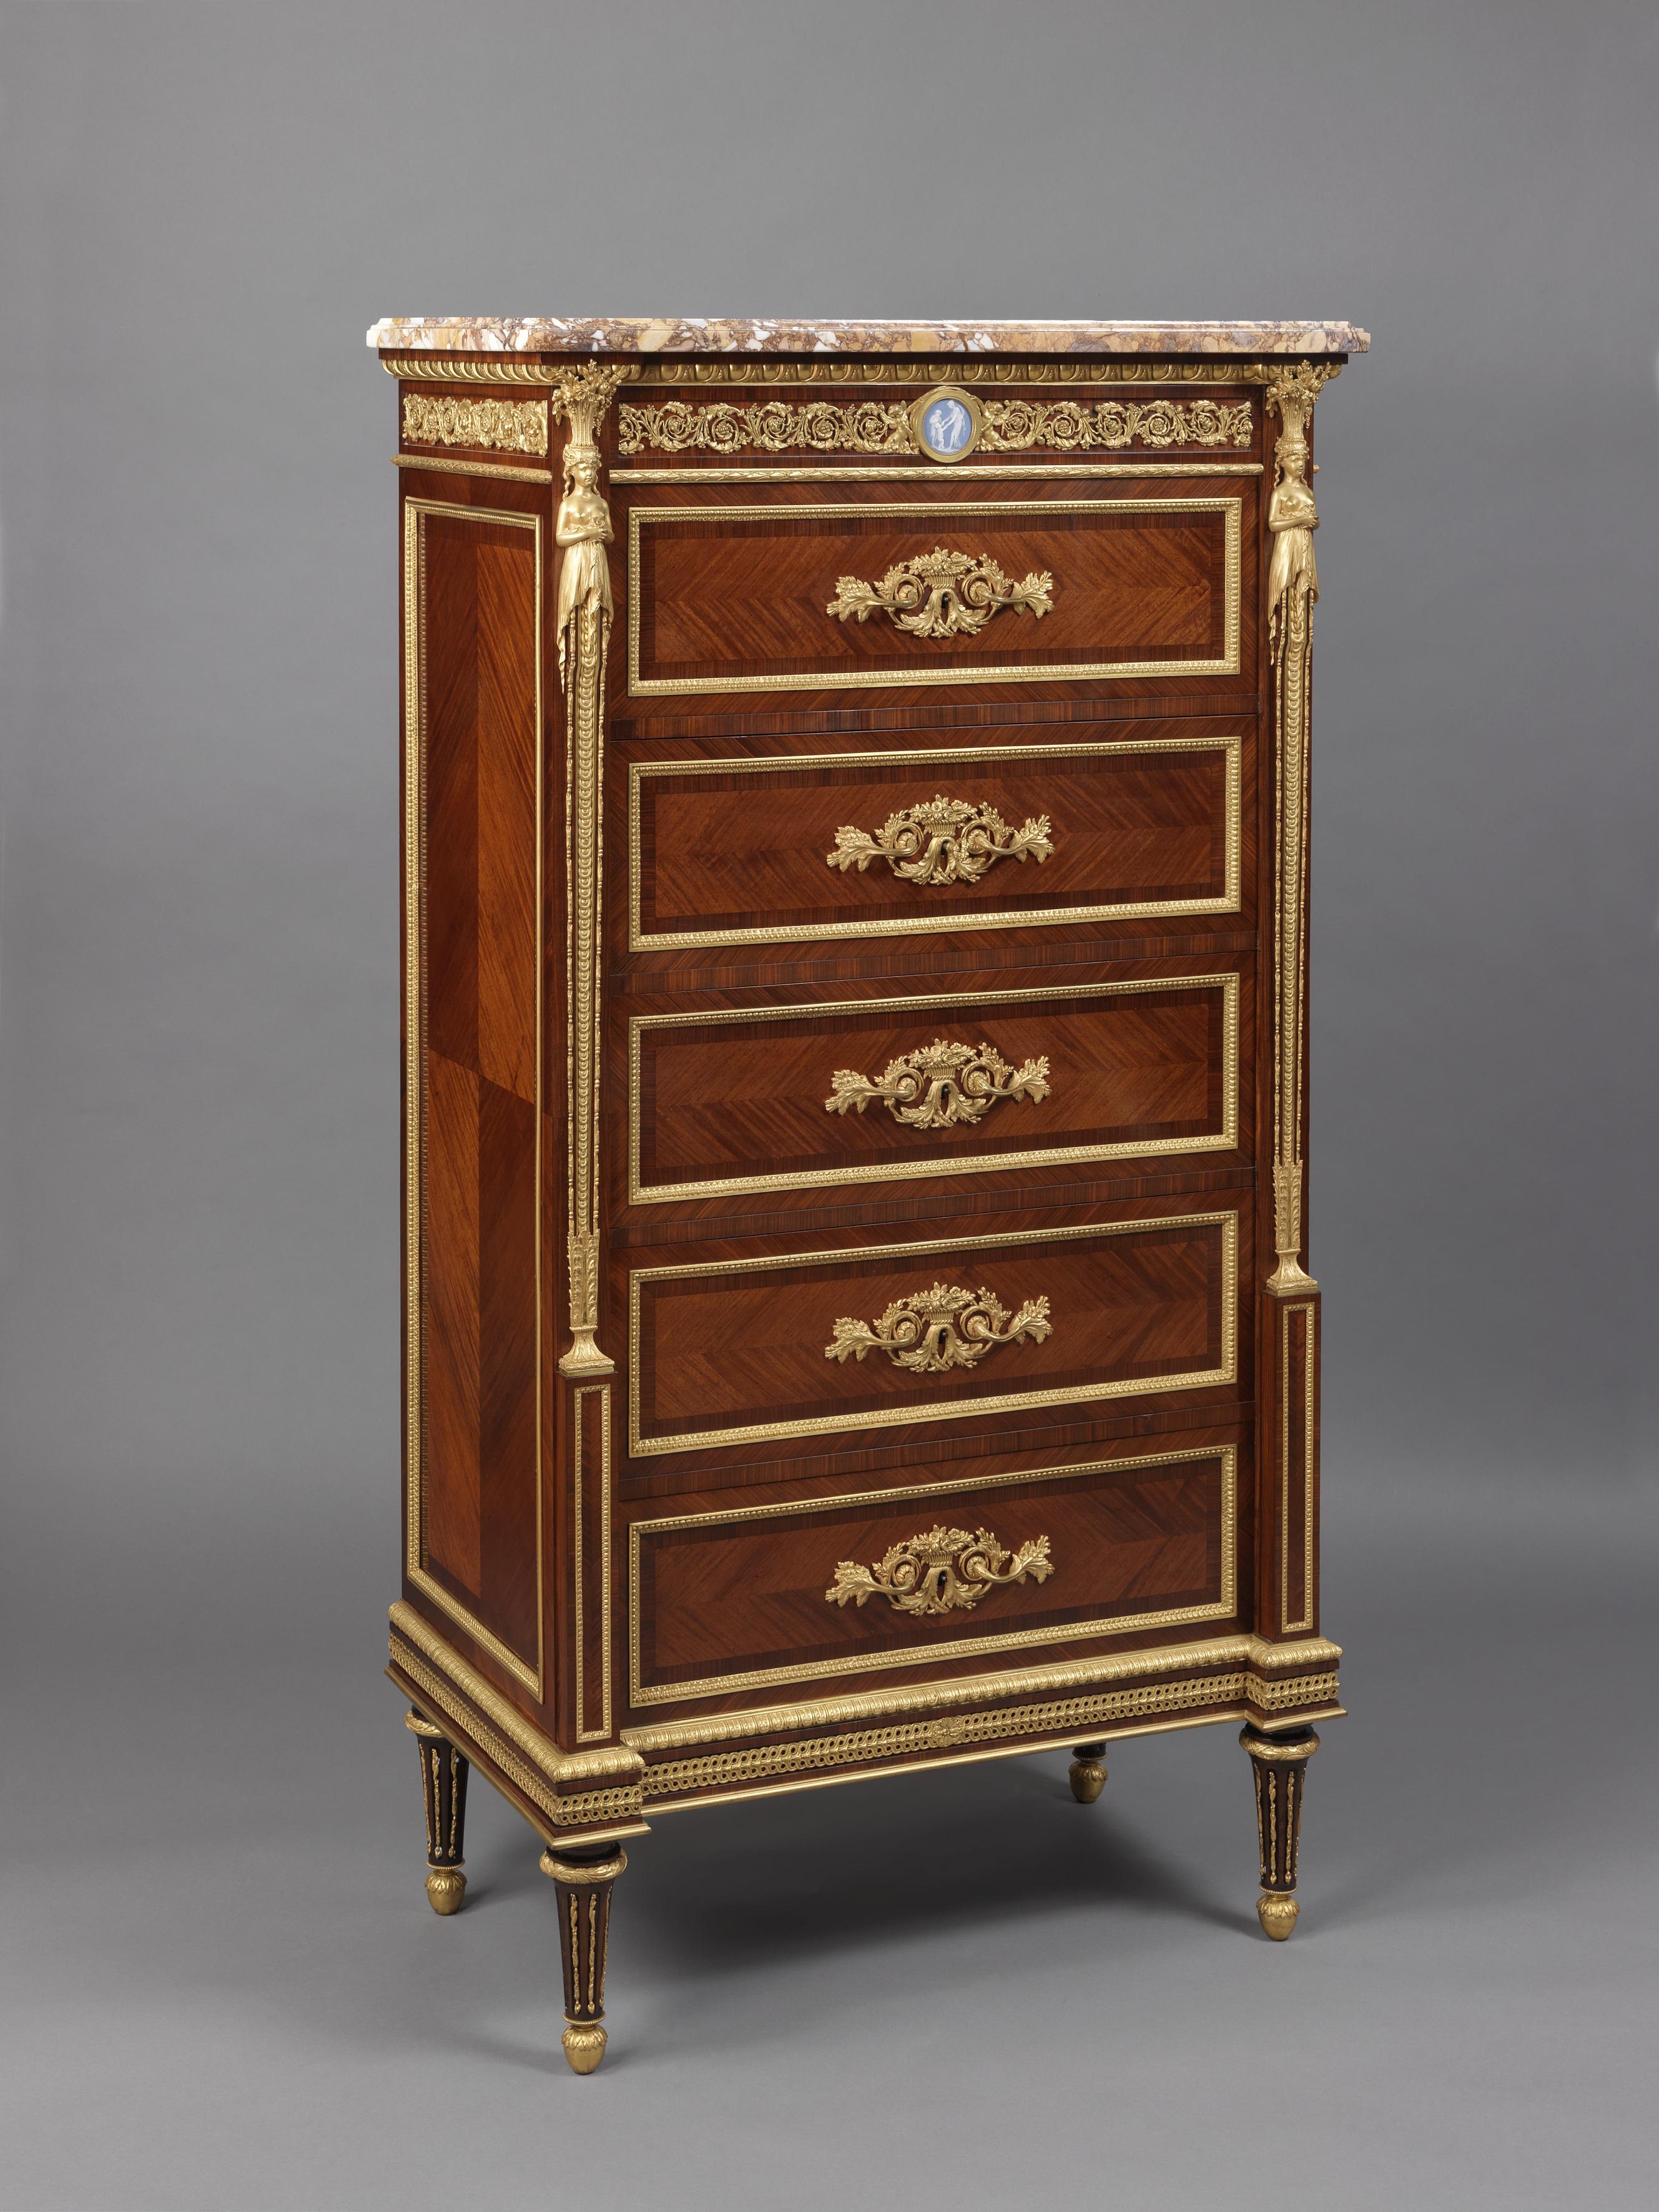 A fine Louis XVI style gilt bronze-mounted five drawer, marble top chiffonier by Joseph-Emmanuel Zwiener.

French, circa 1880.

Stamped to the carcass and to the top of one drawer ‘E.ZWIENER’. 

The bronze handles stamped with the letter ‘Z’,